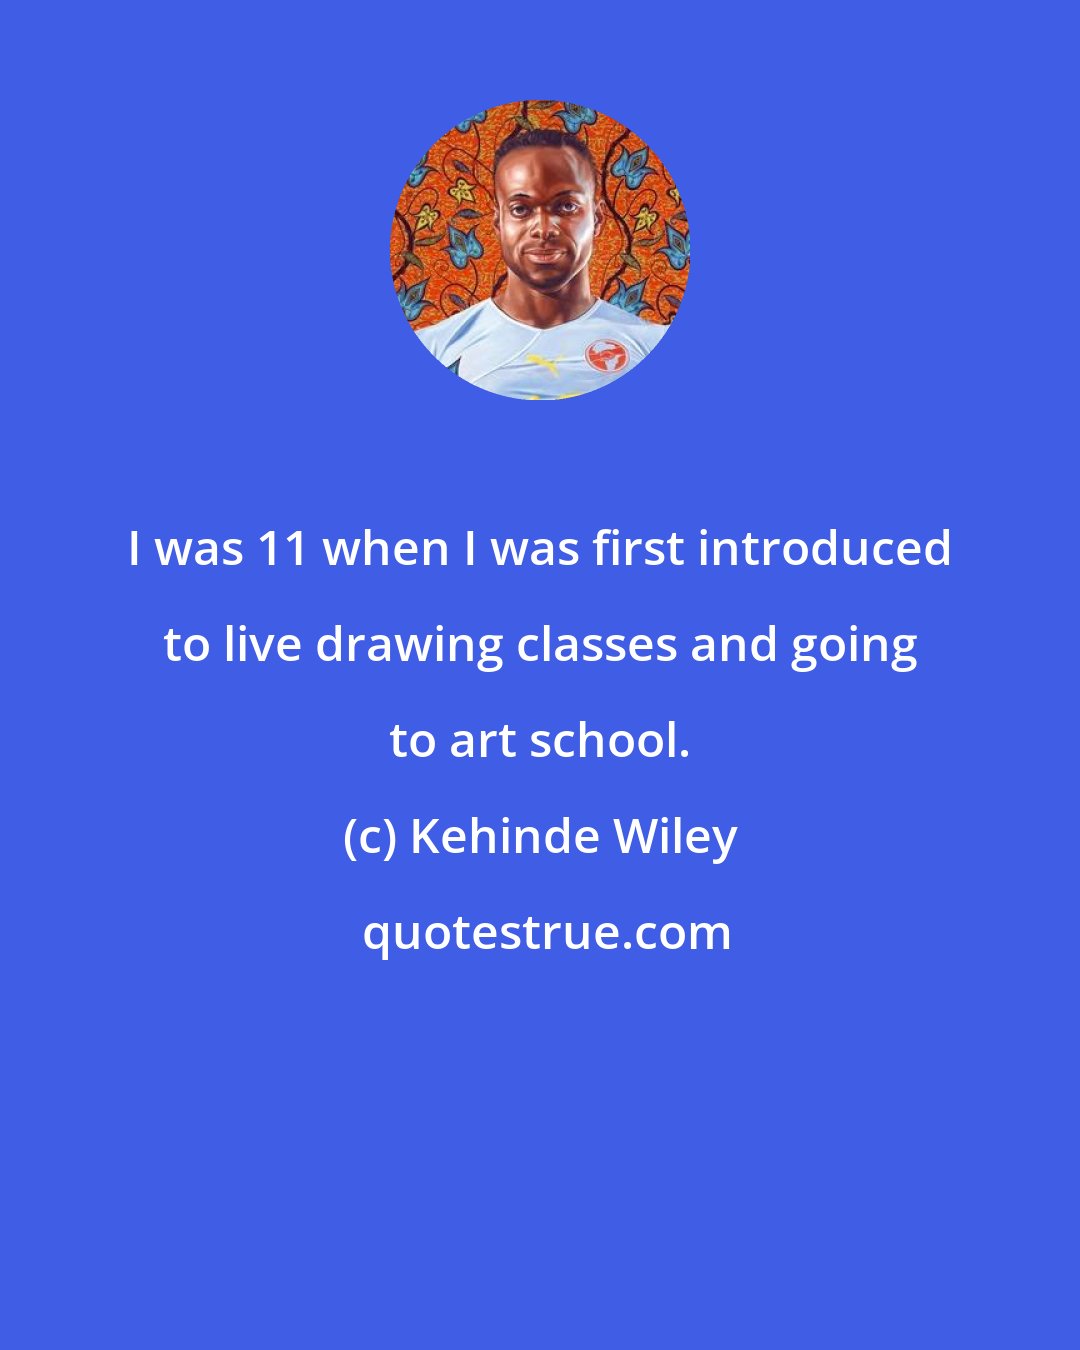 Kehinde Wiley: I was 11 when I was first introduced to live drawing classes and going to art school.